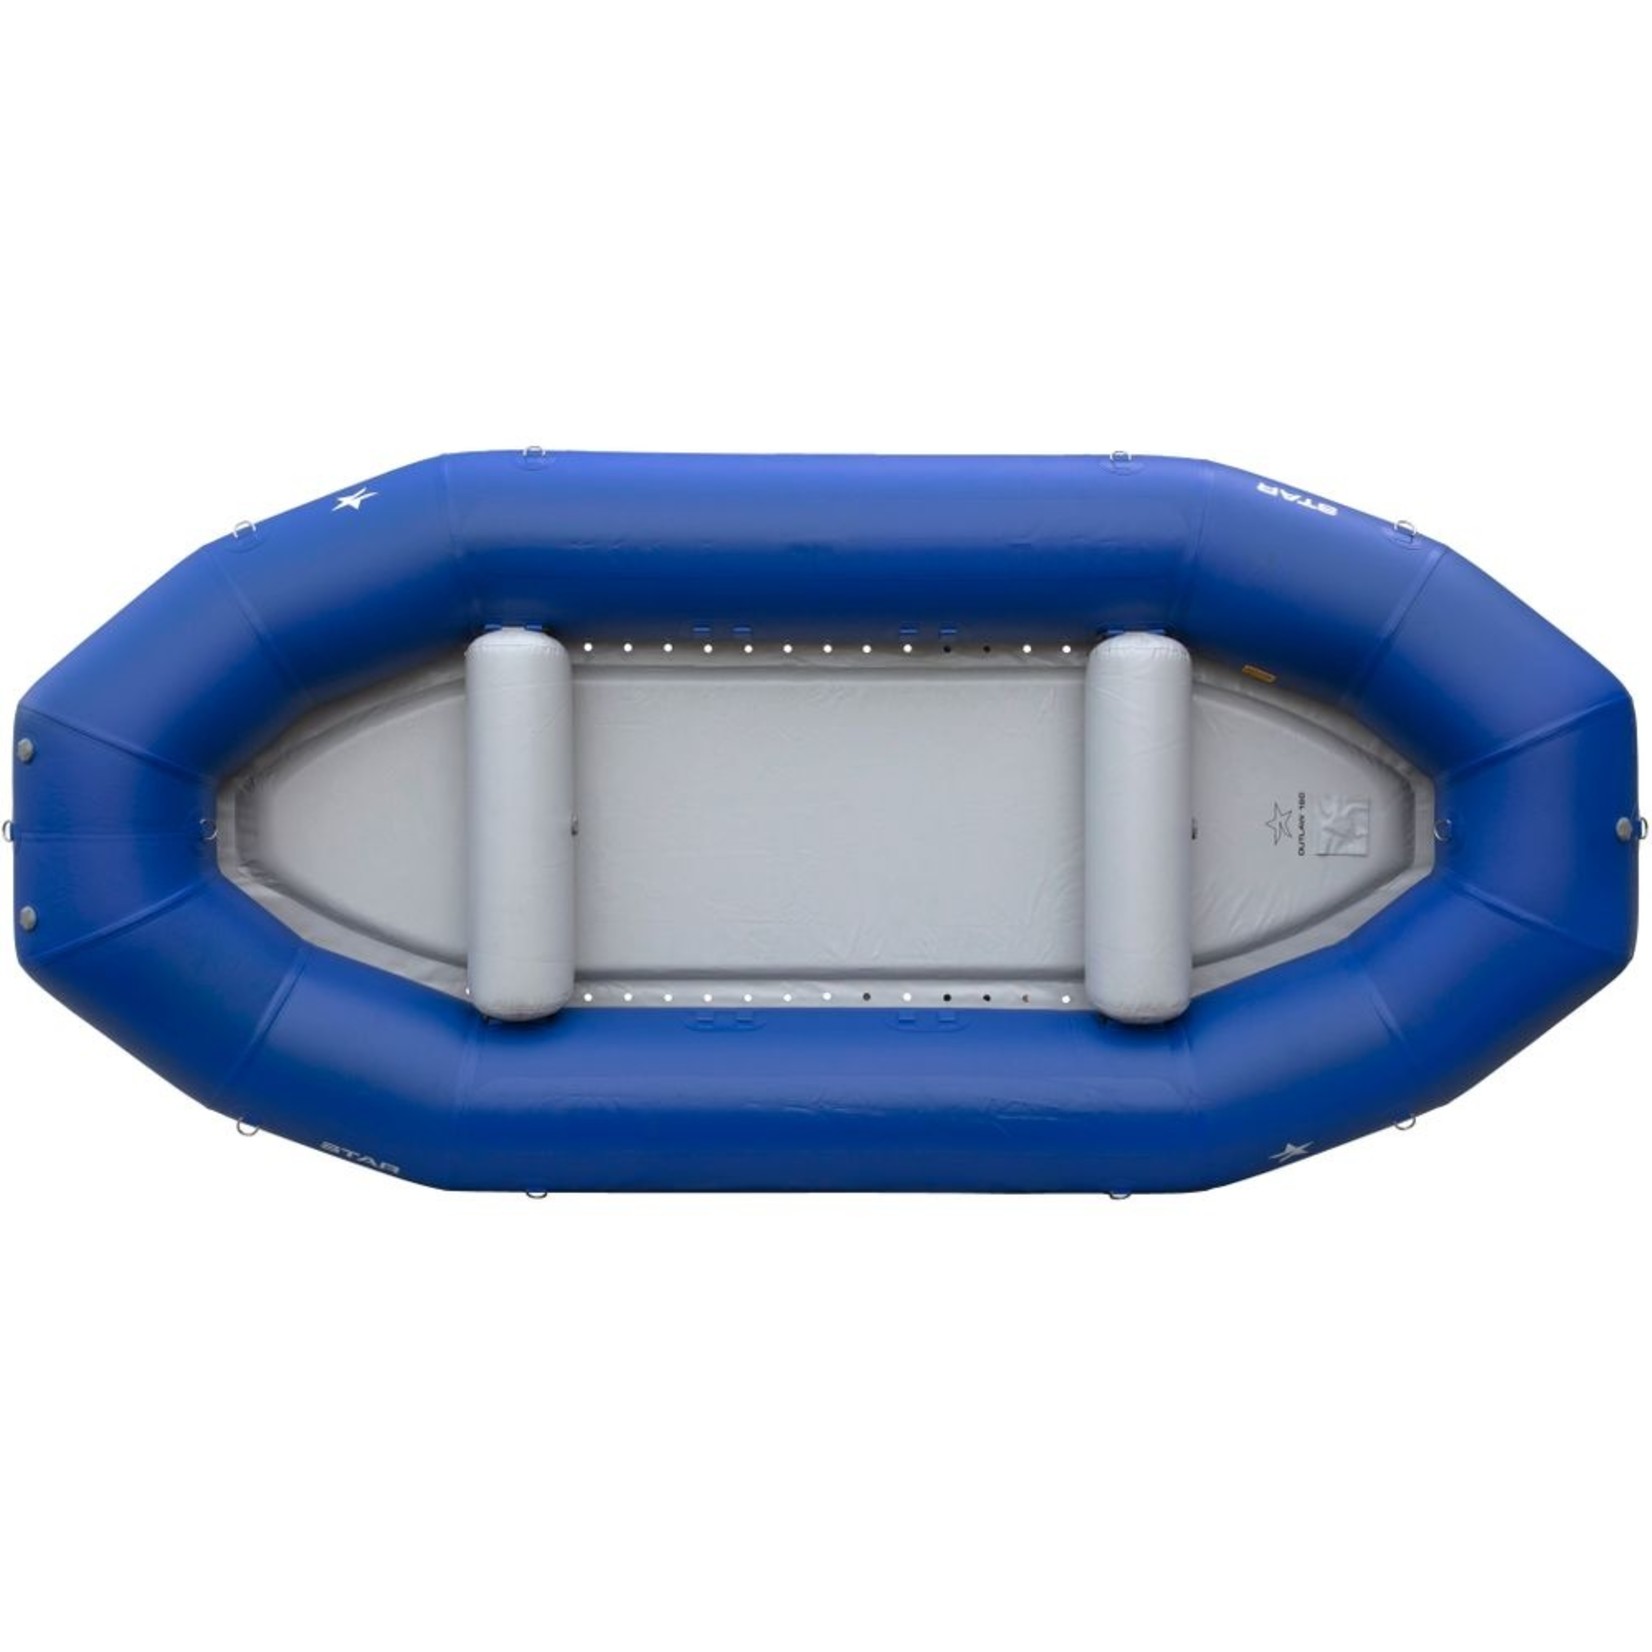 STAR Inflatables STAR Outlaw 160 Self-Bailing Raft